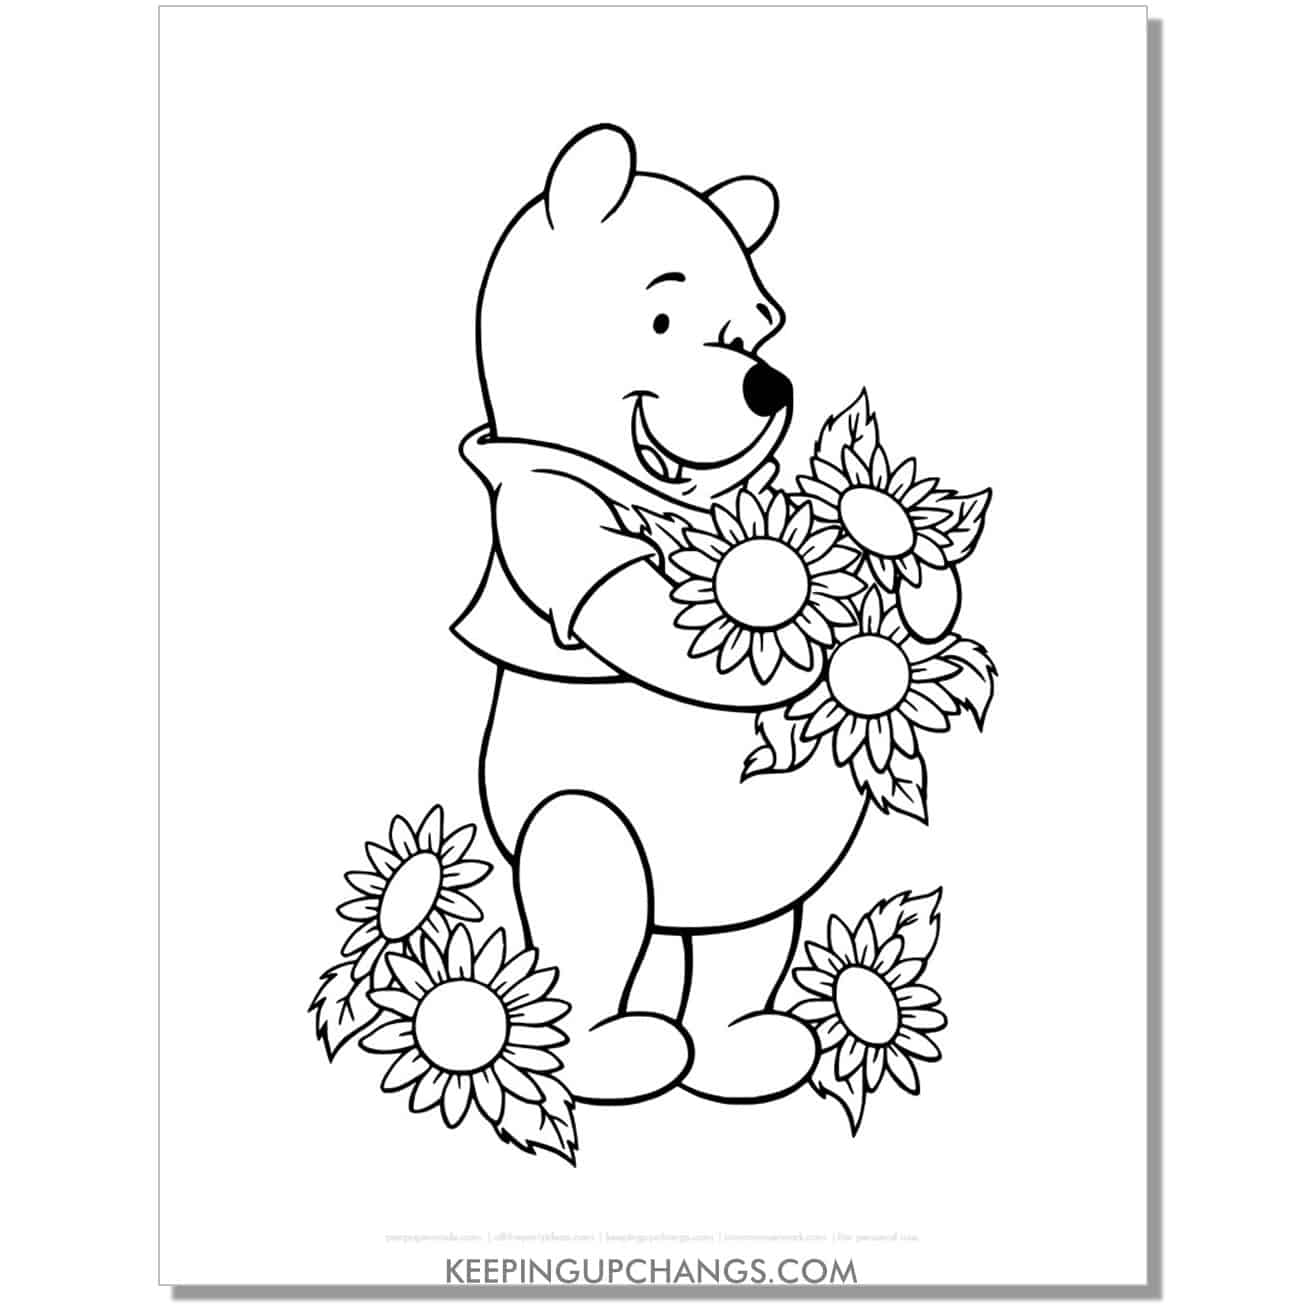 winnie the pooh holding sunflowers coloring page, sheet.